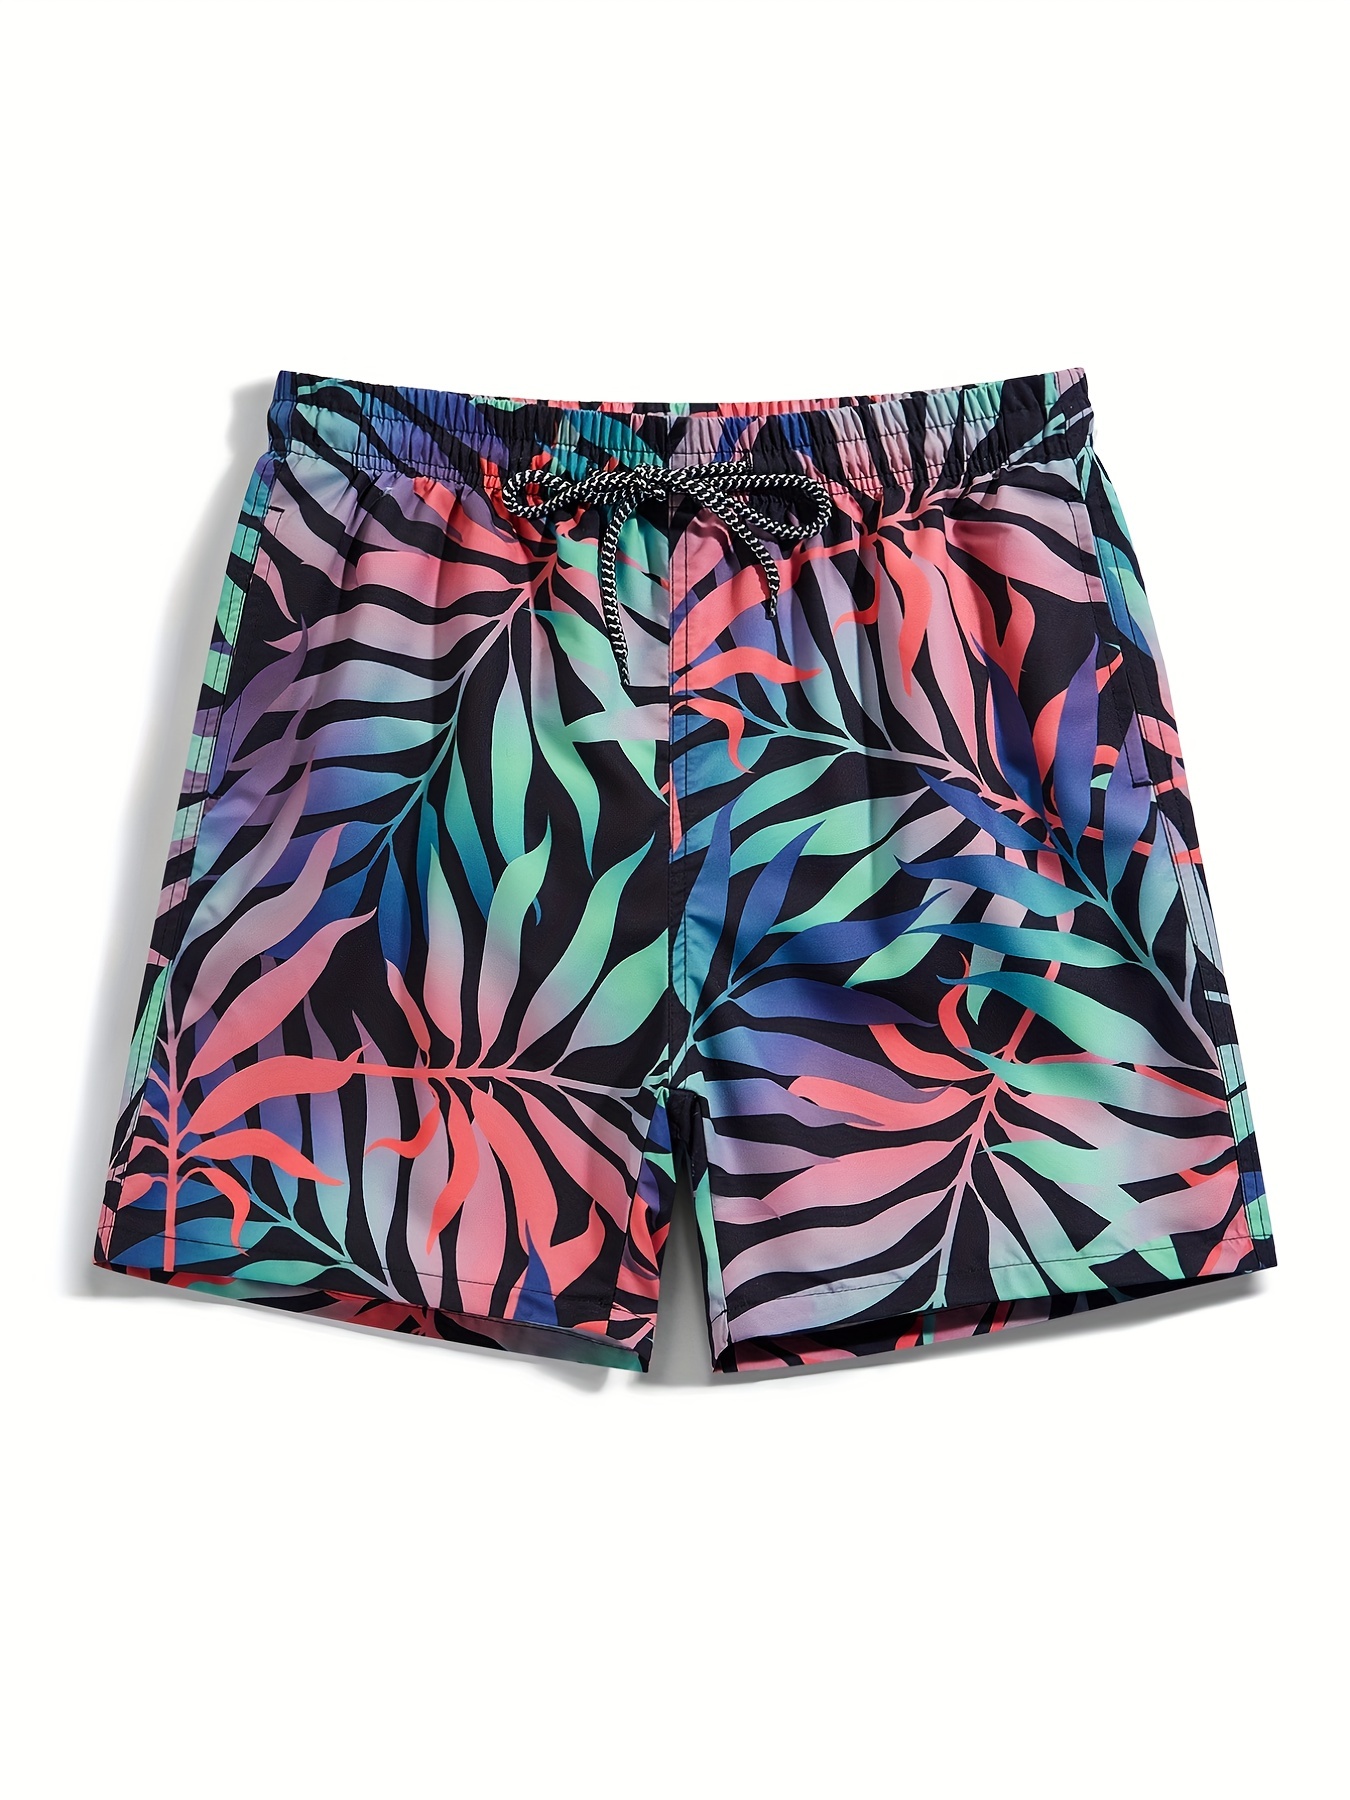 Men's Swim Trunks Quick Dry Beach Shorts with Pockets